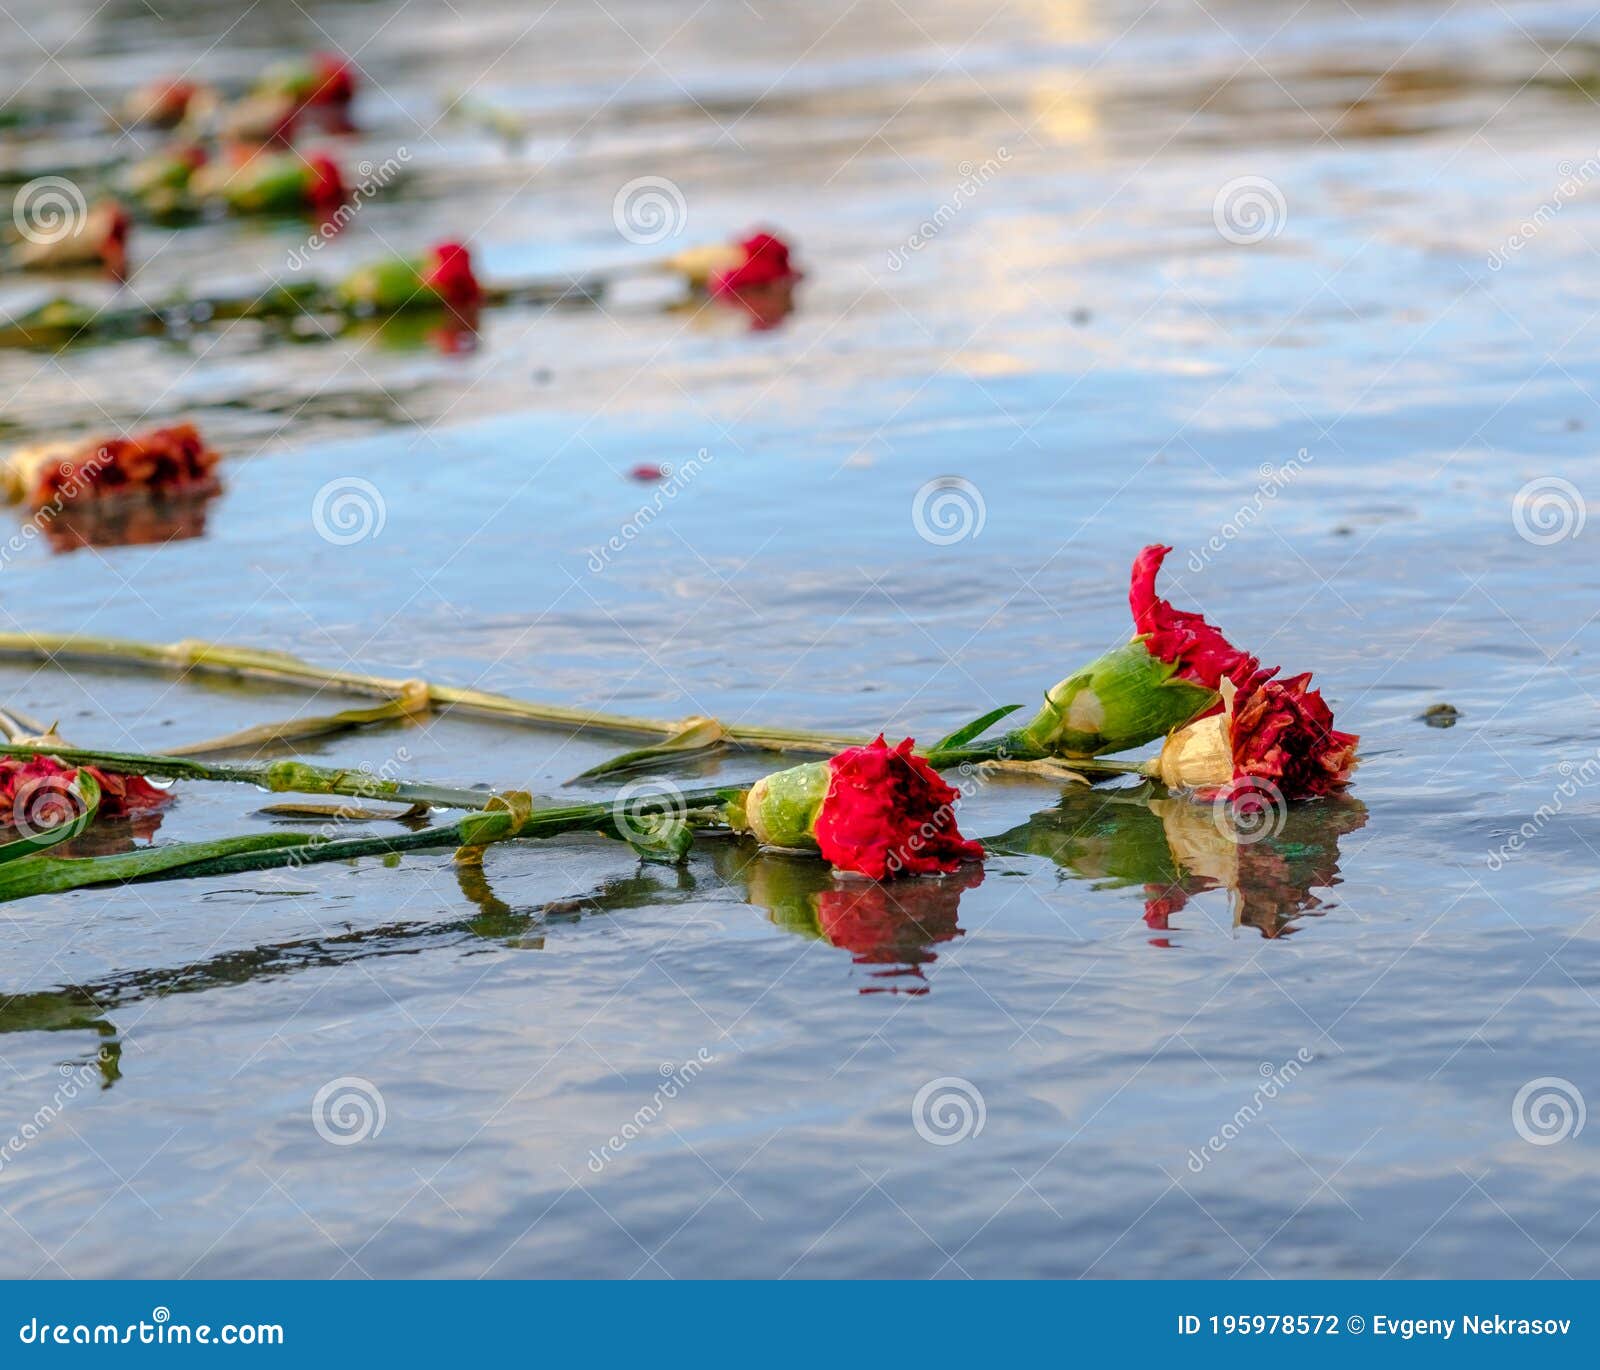 Red Withered Carnations Lie on the Wet Stone Surface. Dead Flowers are ...